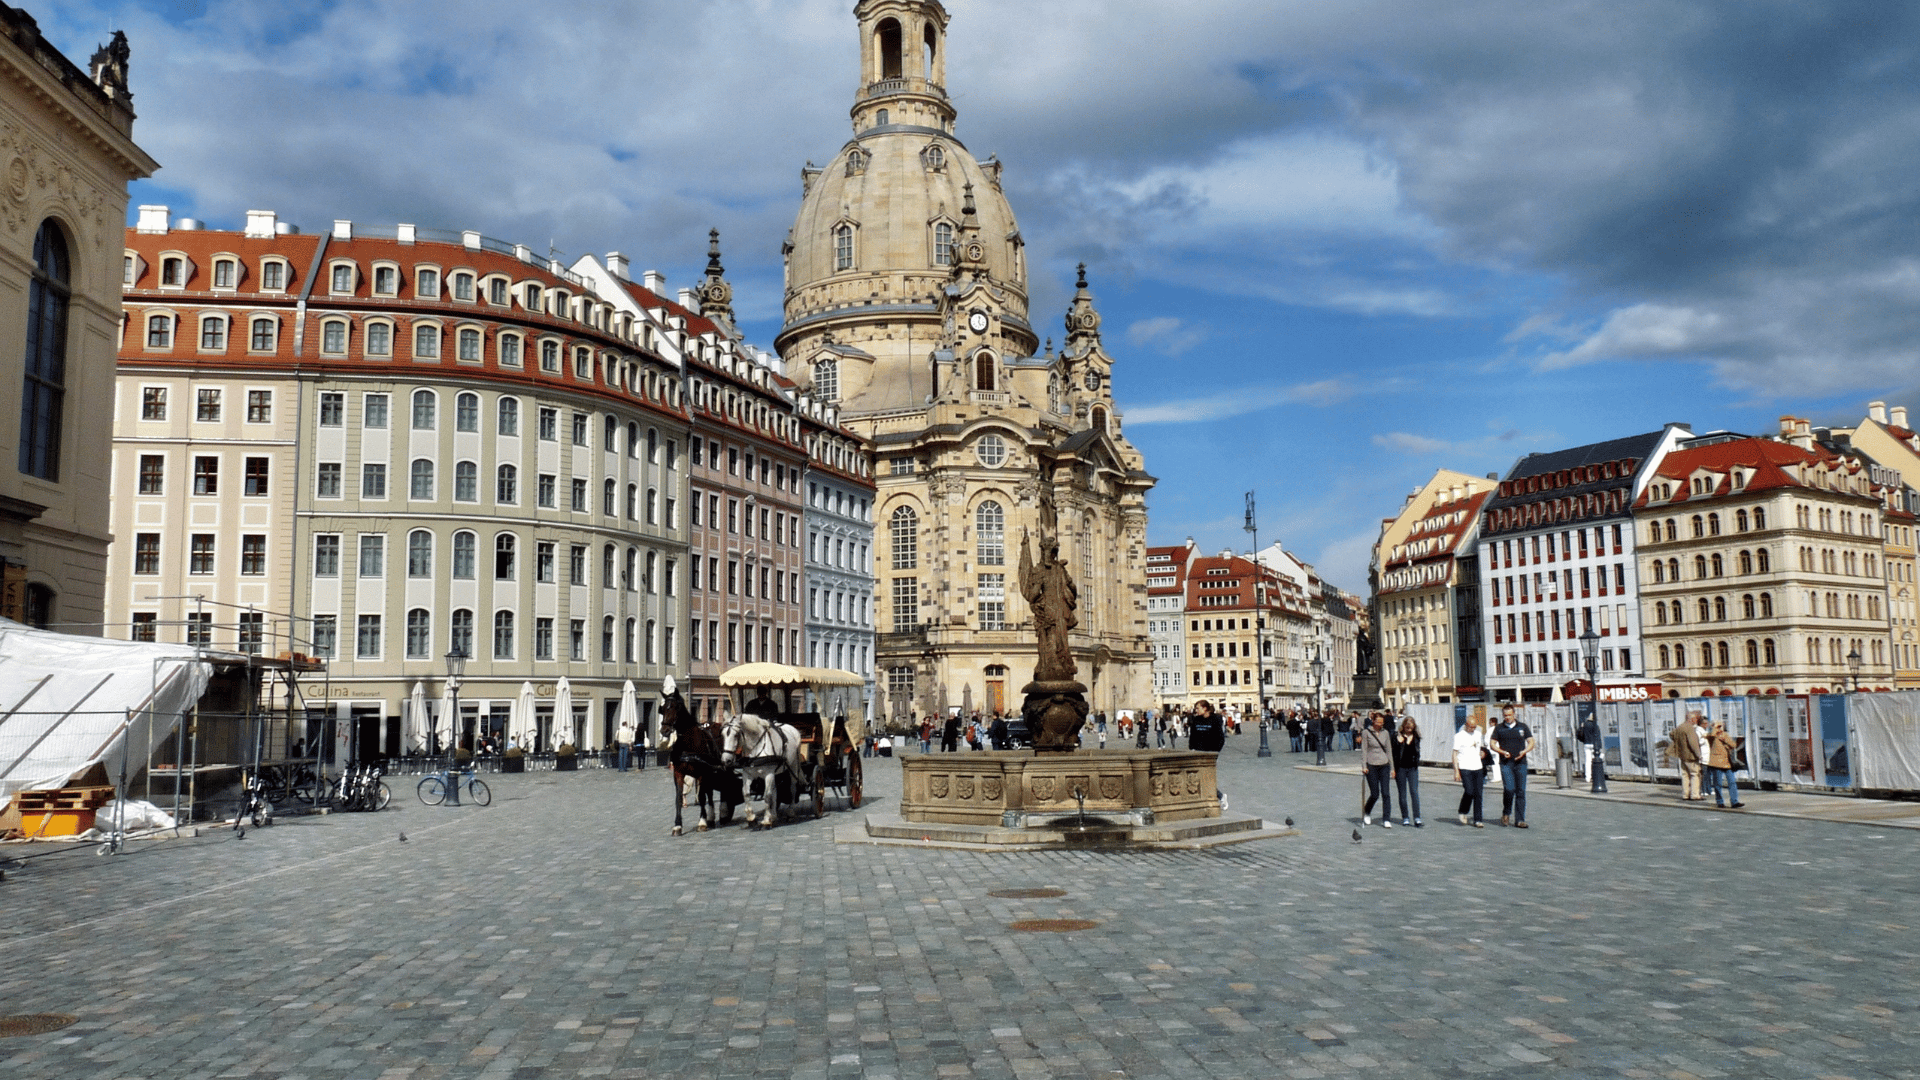 An image of a European town square.